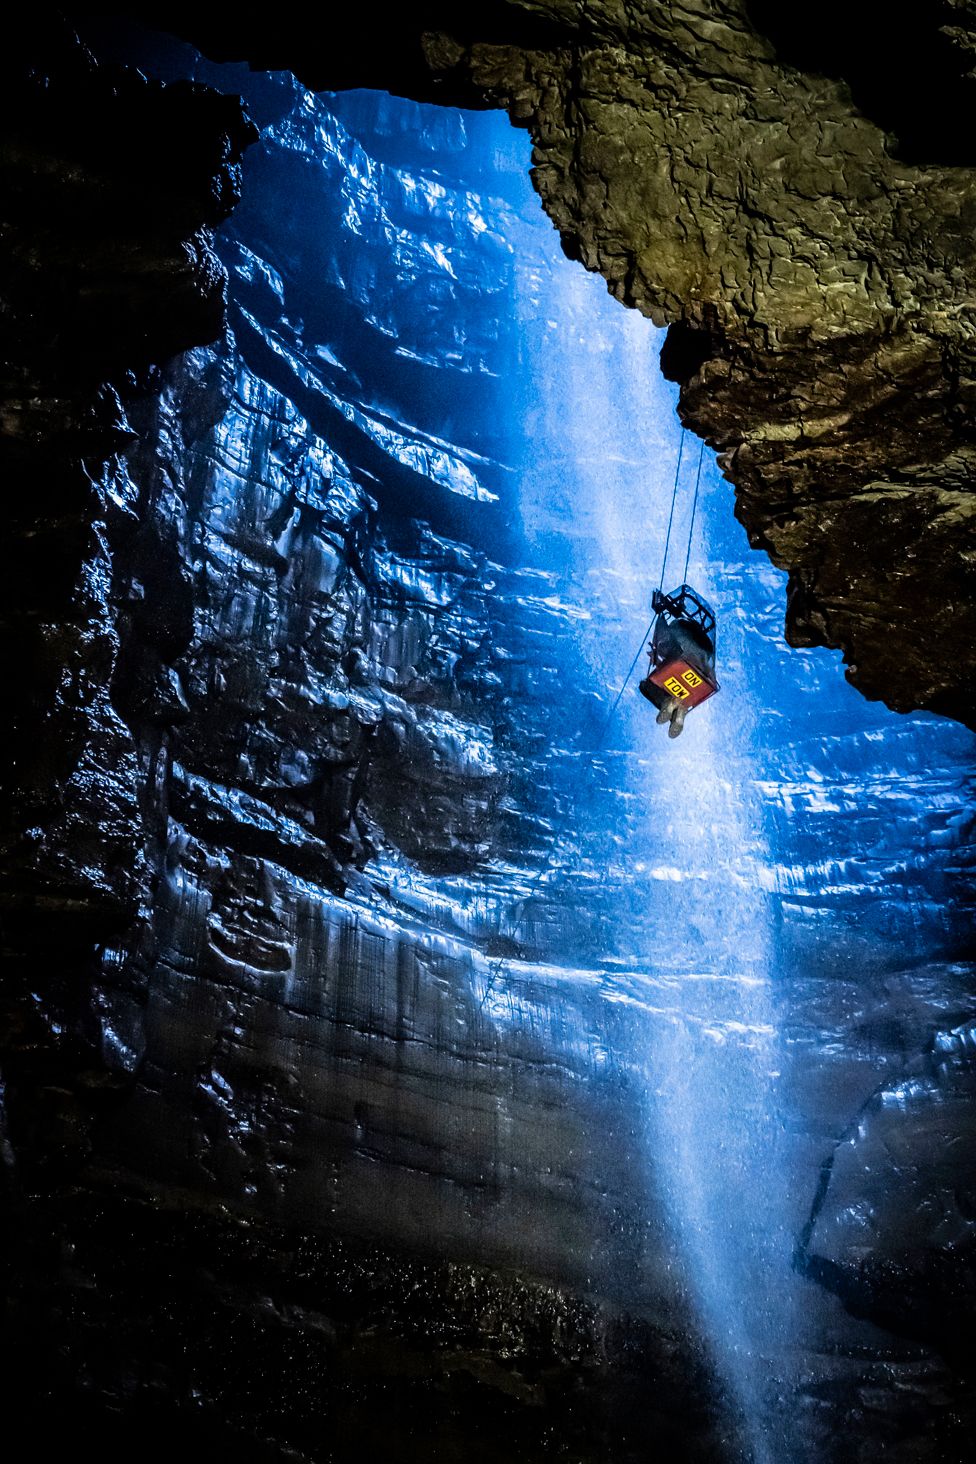 A potholer is winched into Gaping Gill, the largest cavern in Britain, situated in Yorkshire Dales National Park as it opens to the public this weekend.